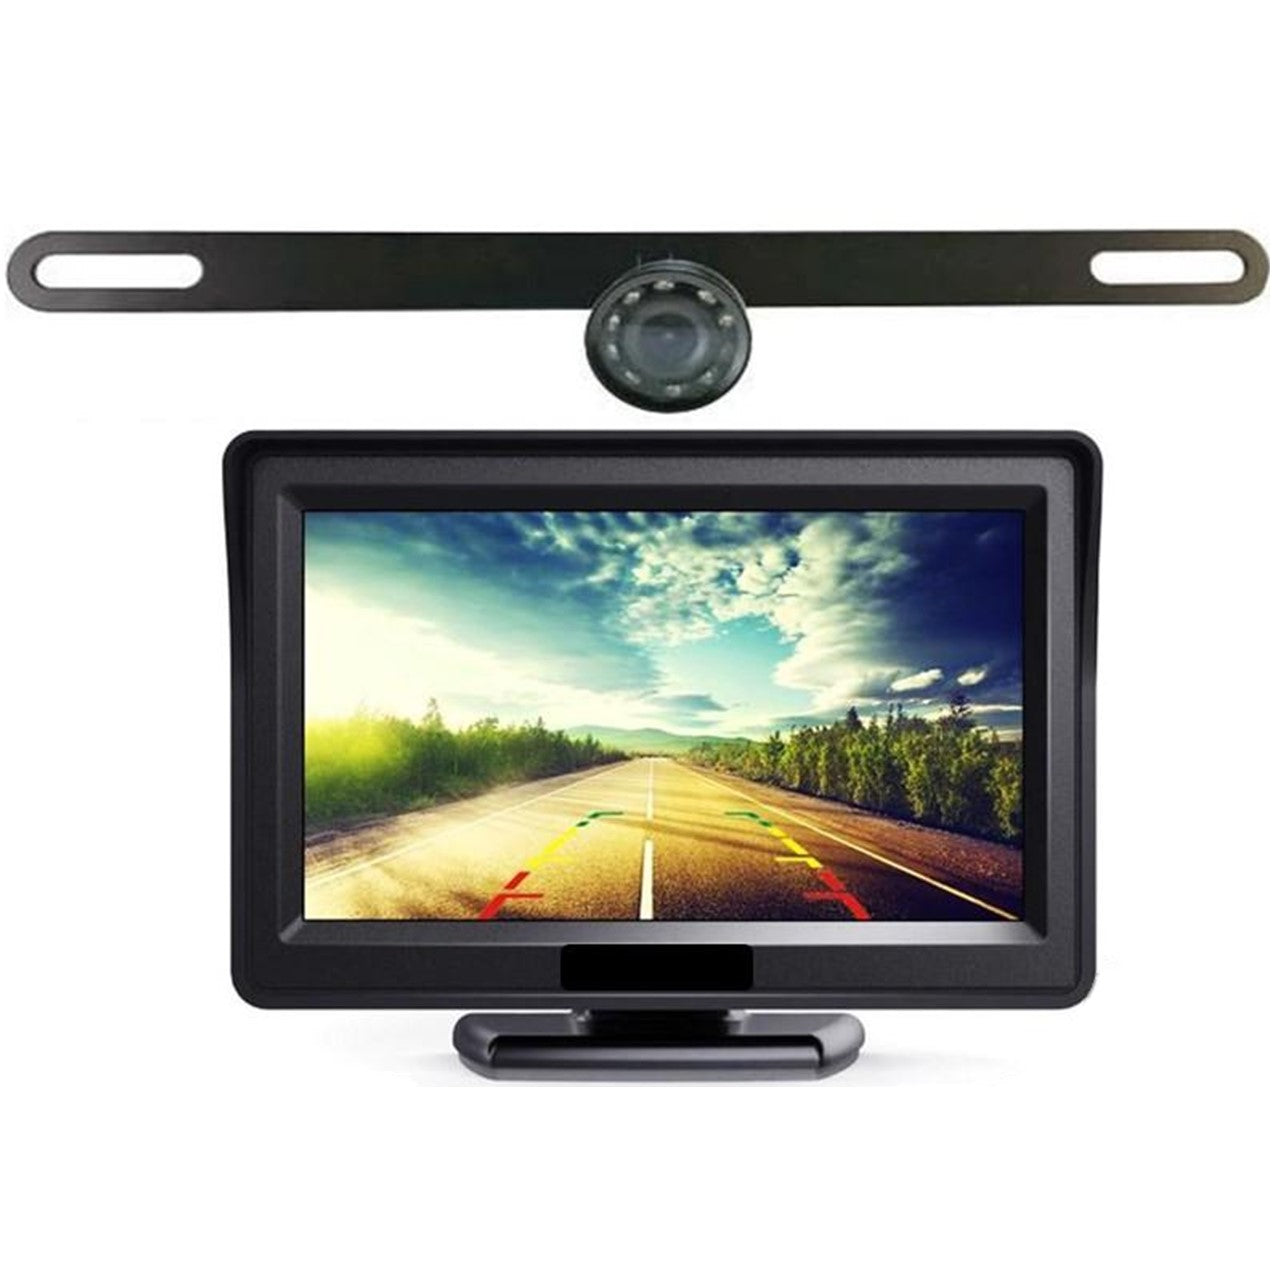 WIRED License Plate Backup Camera w/ 4.3